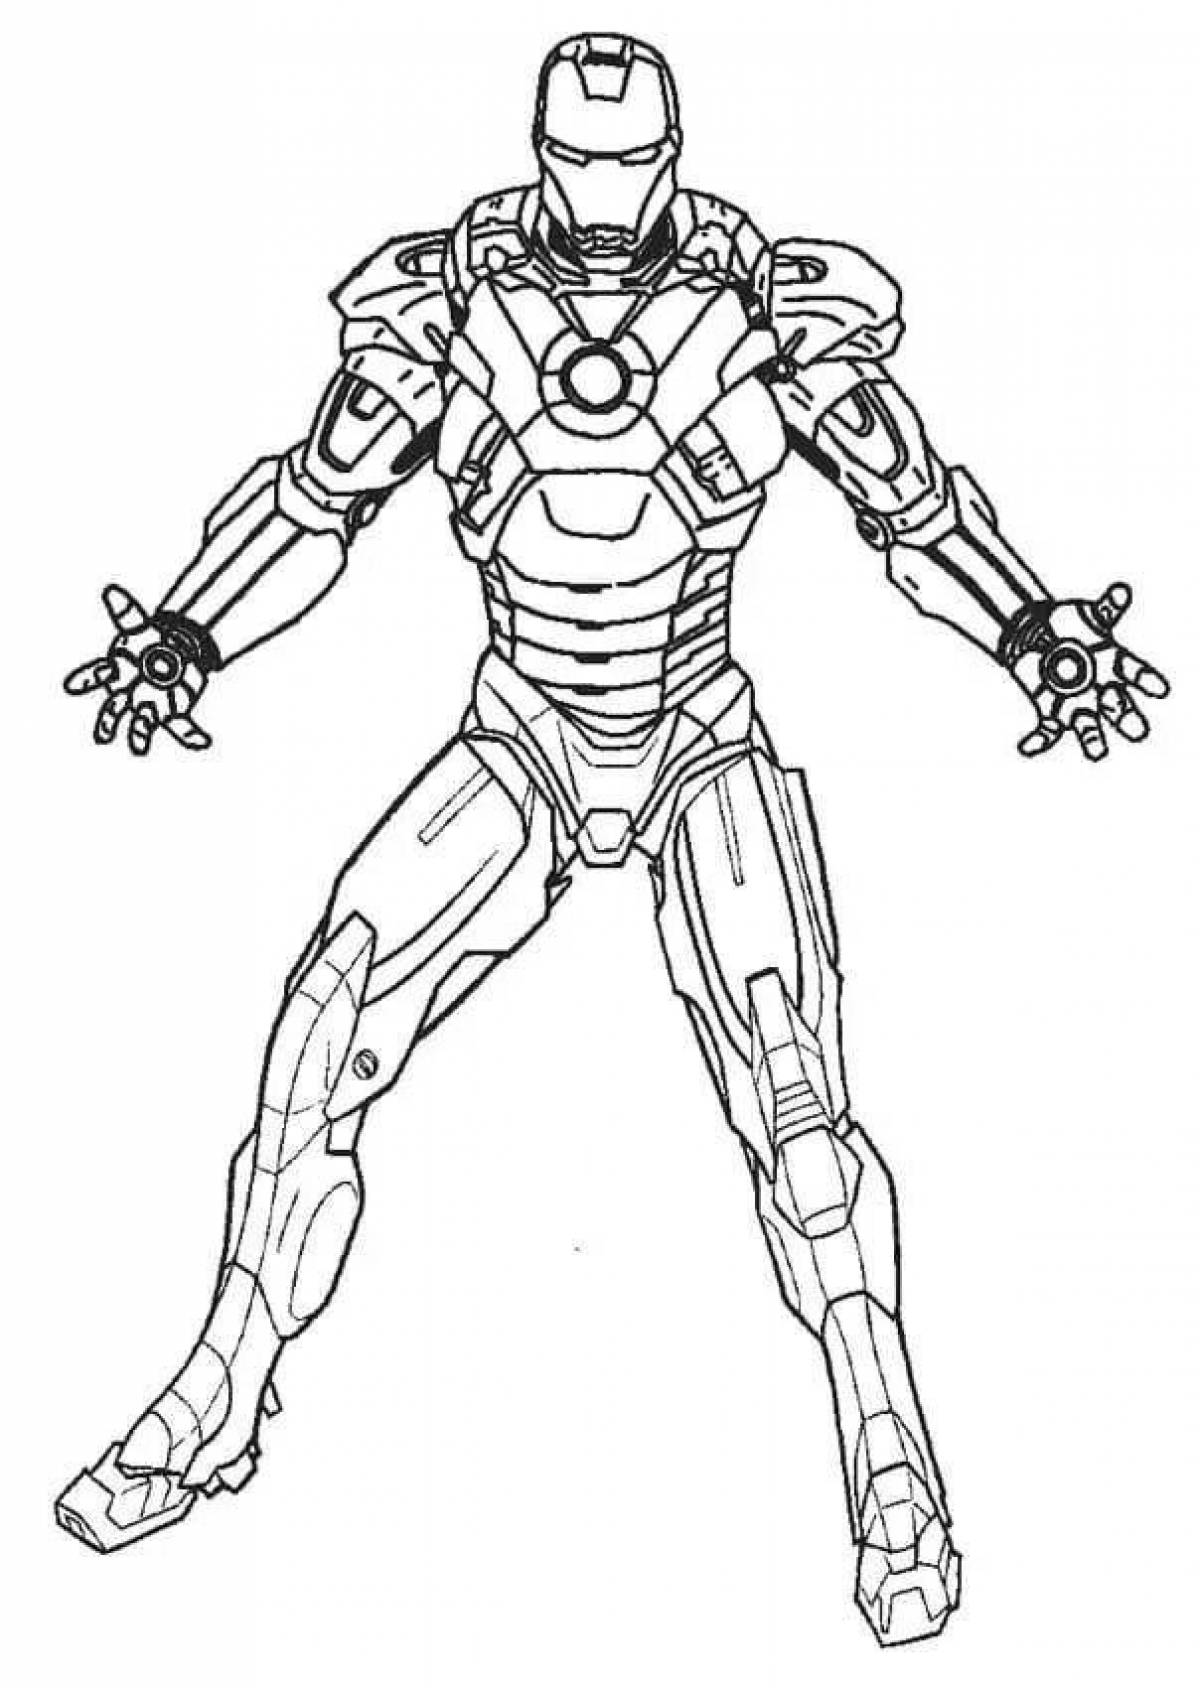 Gorgeous iron man coloring page